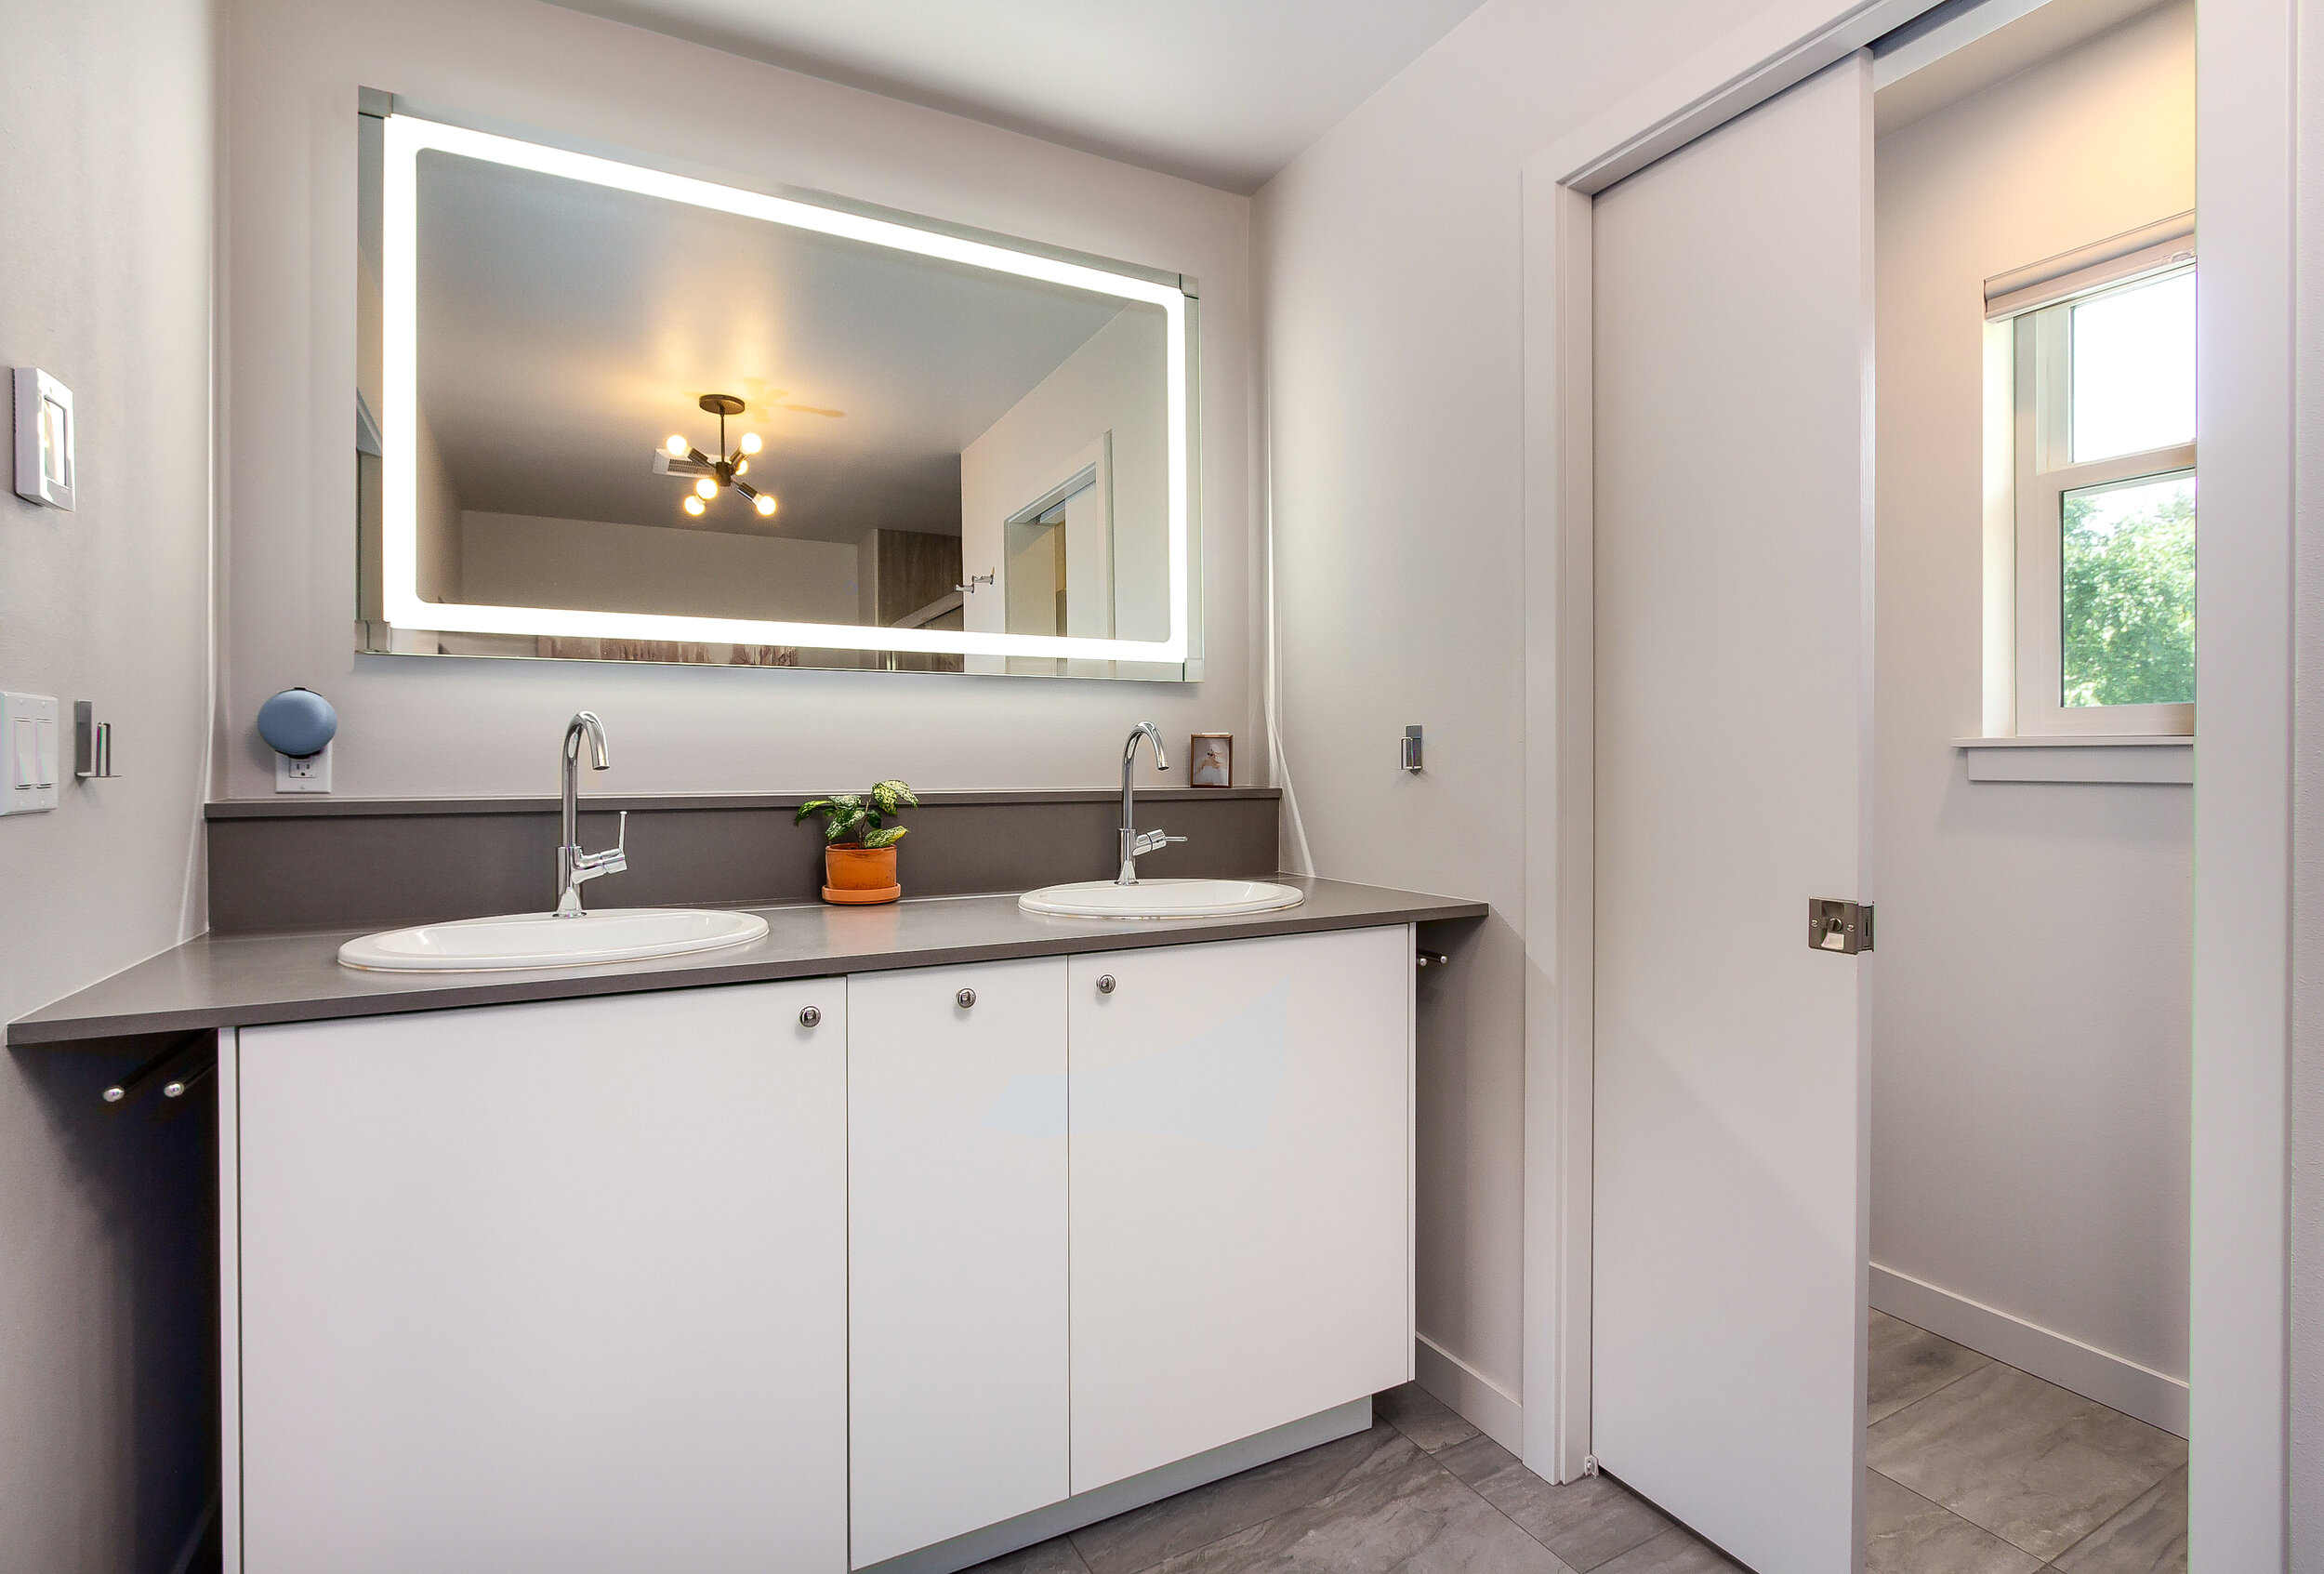 Dual sinks and a lighted mirror are just a few of the sophisticated touches that complete the master bath.